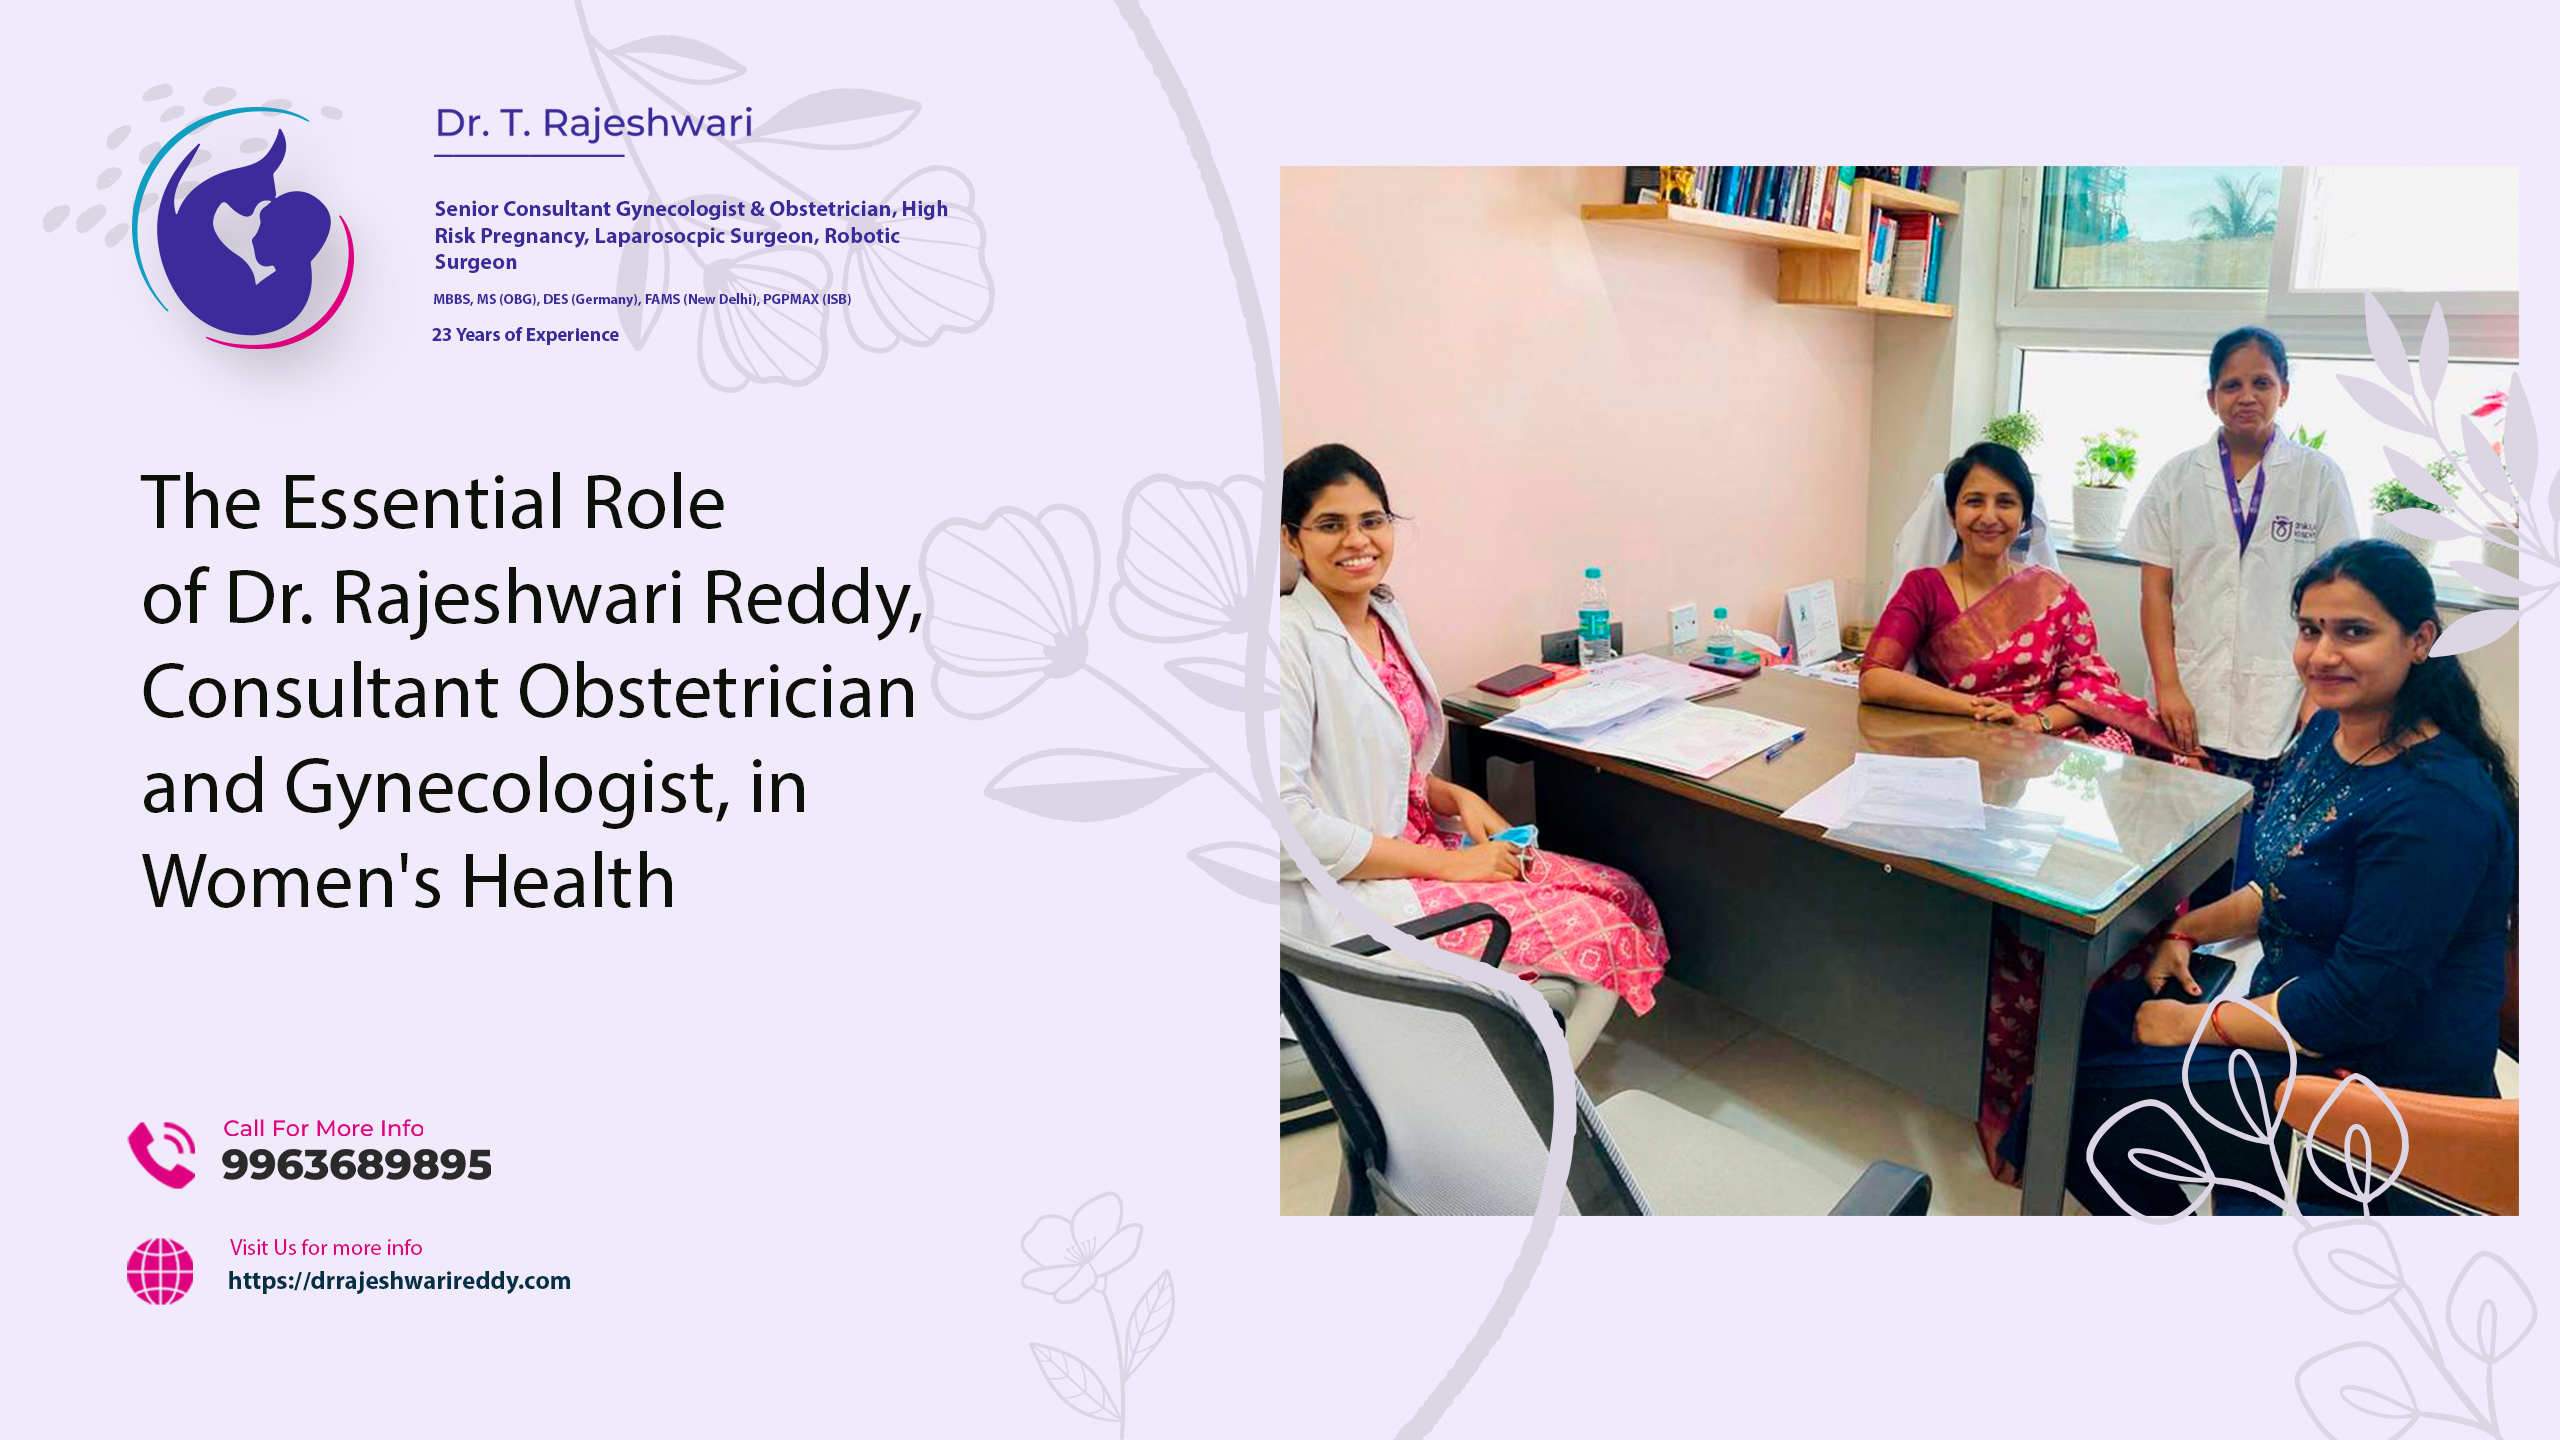 You are currently viewing The Essential Role of Dr. Rajeshwari Reddy, Consultant Obstetrician and Gynecologist, in Women’s Health